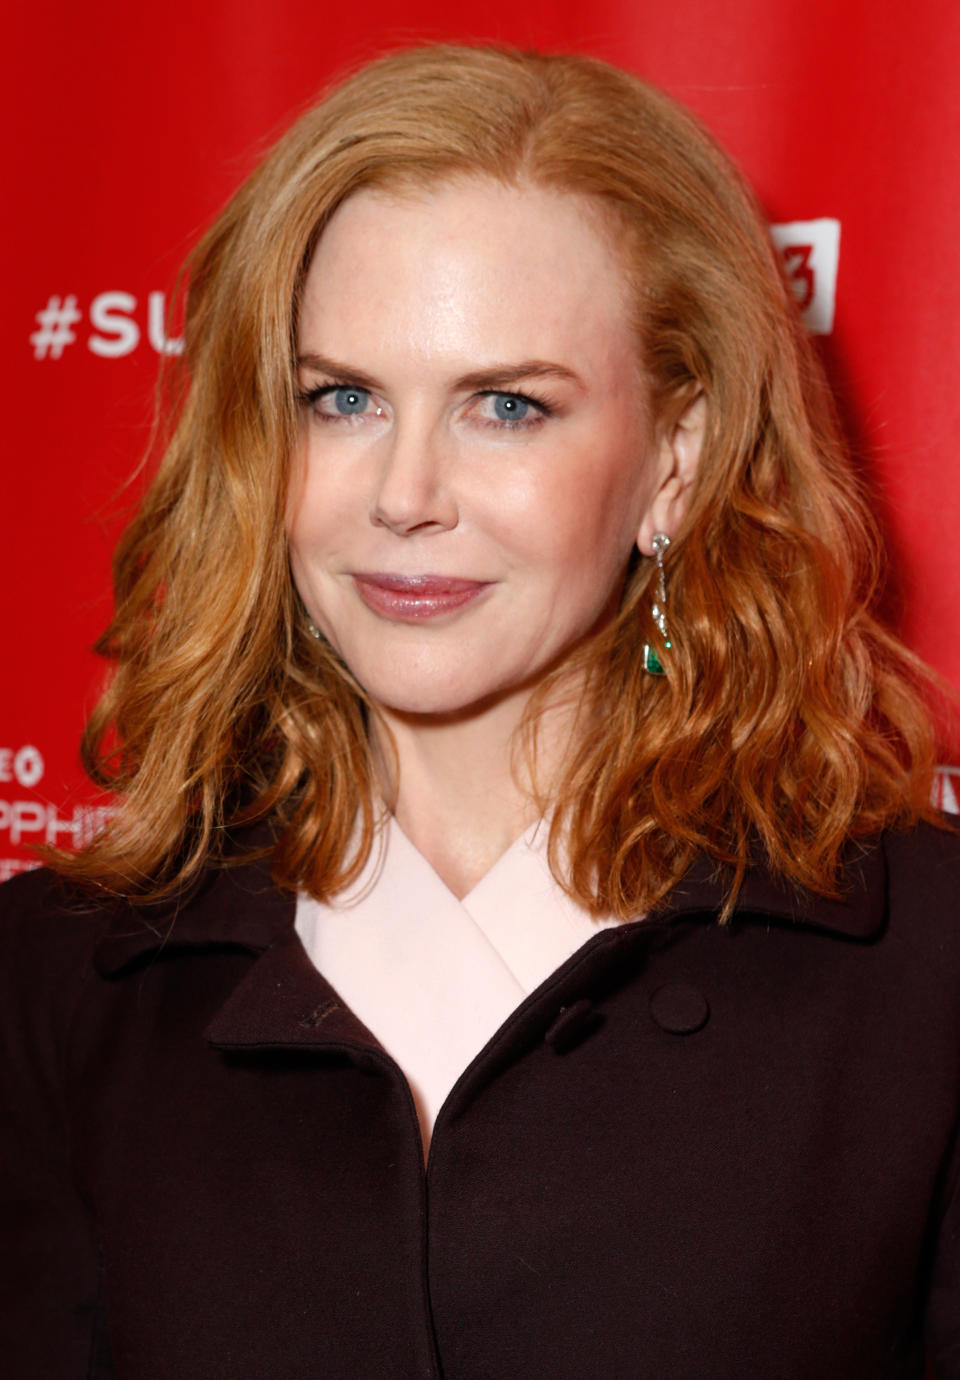 IMAGE DISTRIBUTED FOR FOX SEARCHLIGHT - Actress Nicole Kidman attends Fox Searchlight's "The Stoker" premiere during the Sundance Film Festival on Sunday, Jan. 20, 2012 in Park City, Utah. (Photo by Todd Williamson /Invision for Fox Searchlight/AP Images)